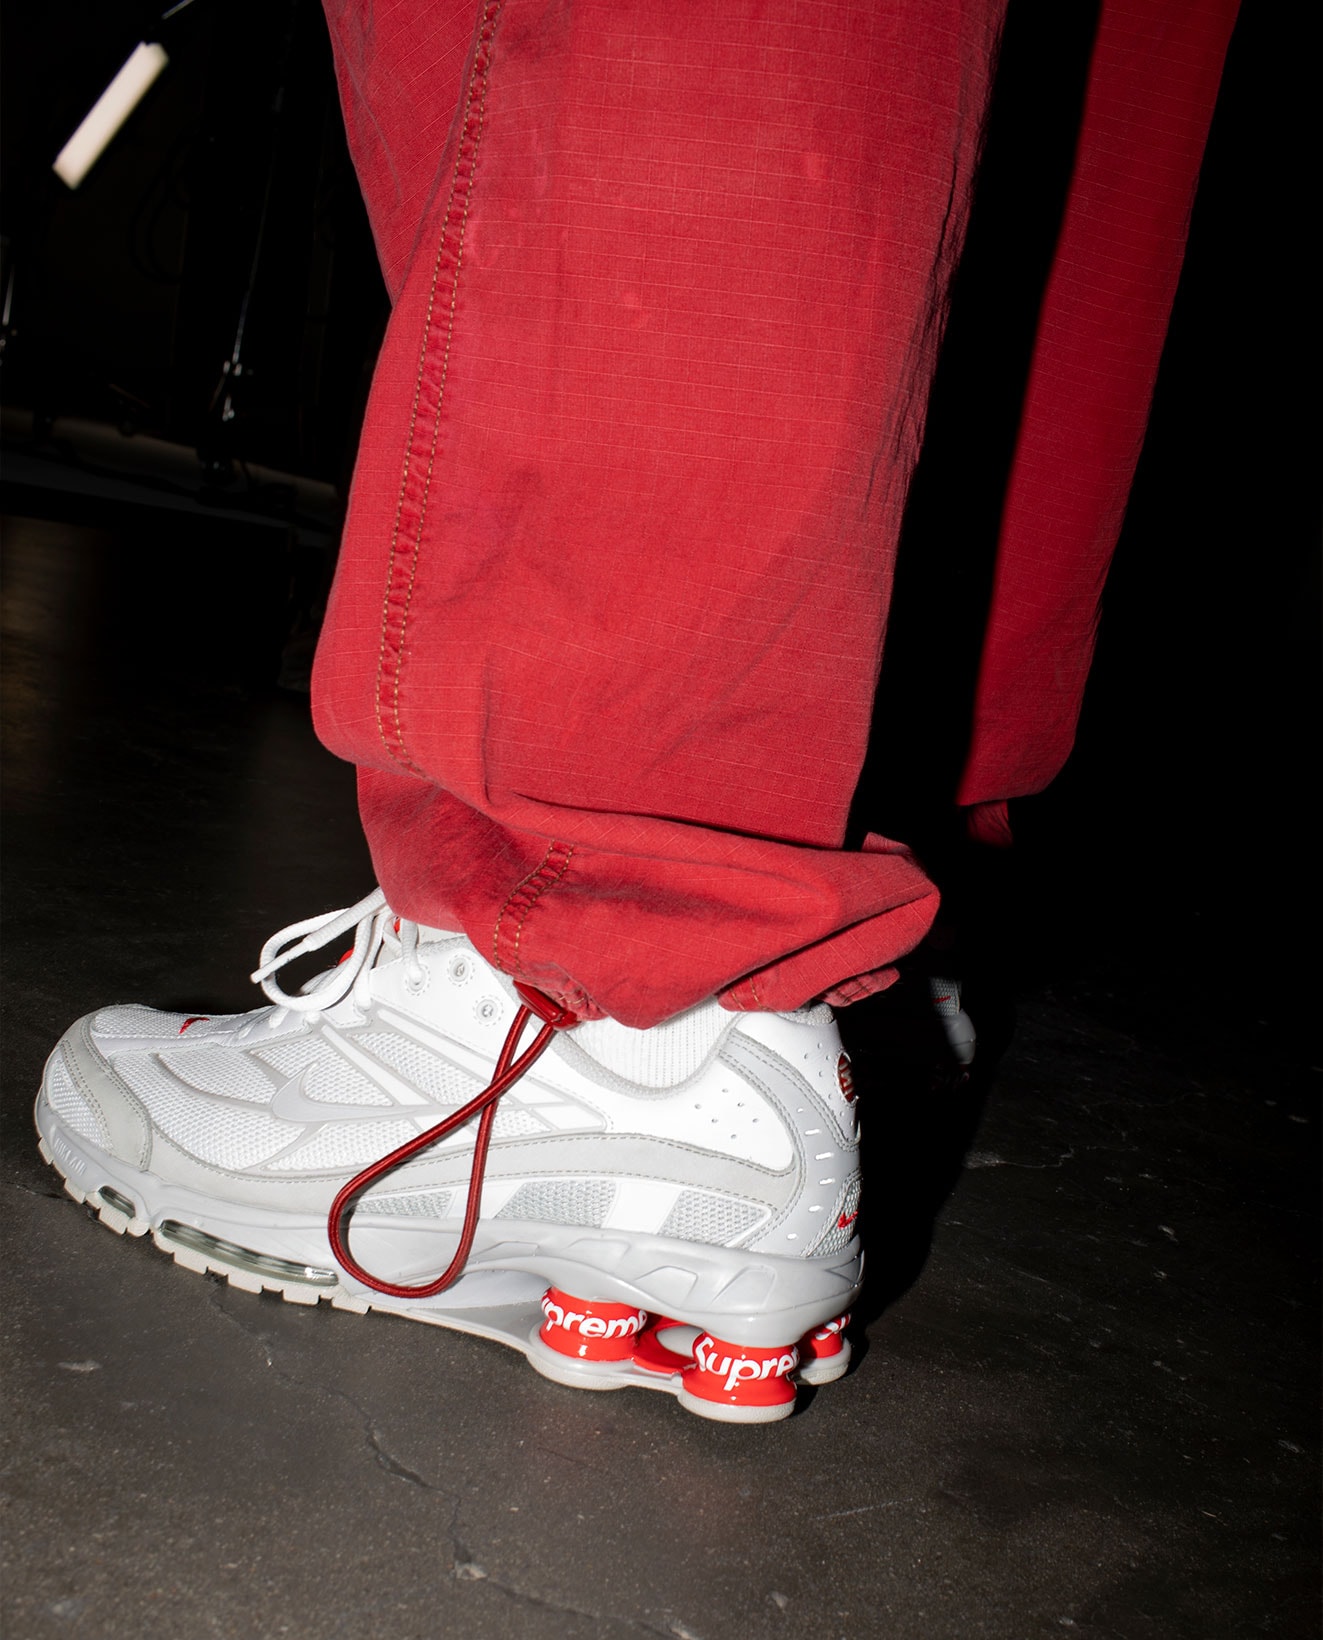 Supreme x Nike Shox Ride 2 Official Images, Release | Hypebae